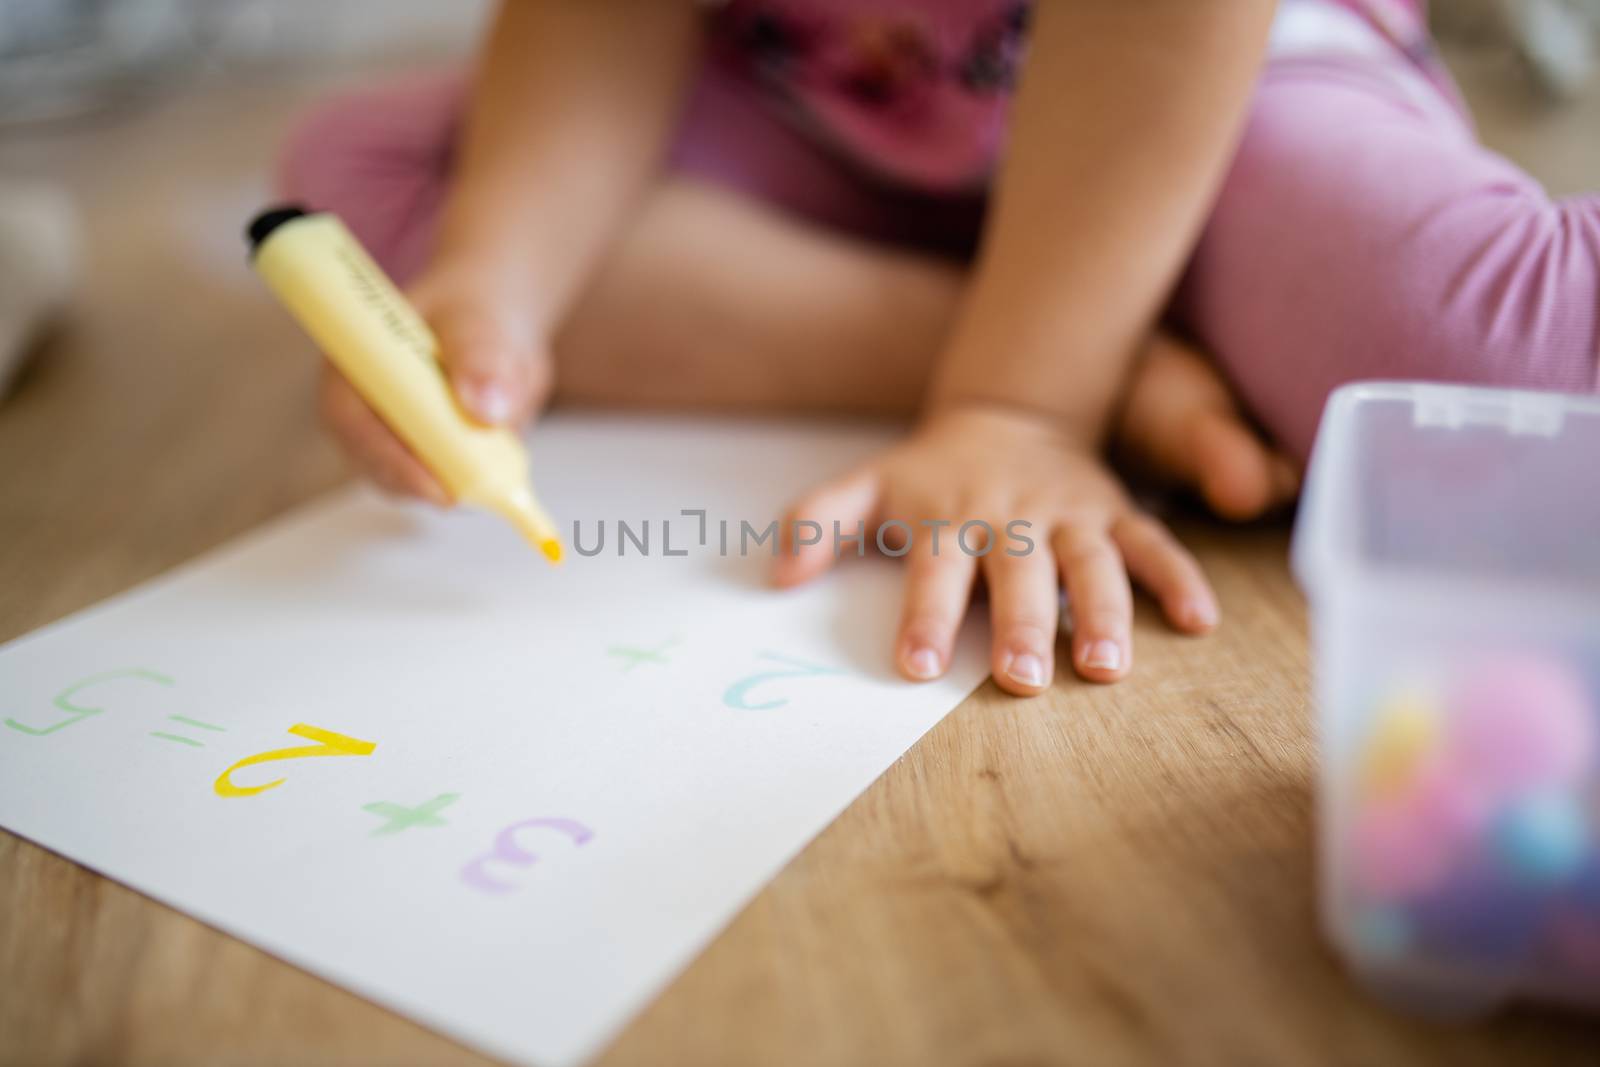 Landscape picture of a little girl in pink clothing sitting on the wooden floor and doing sums on a paper sheet with a yellow textmarker, alongside a plastic box